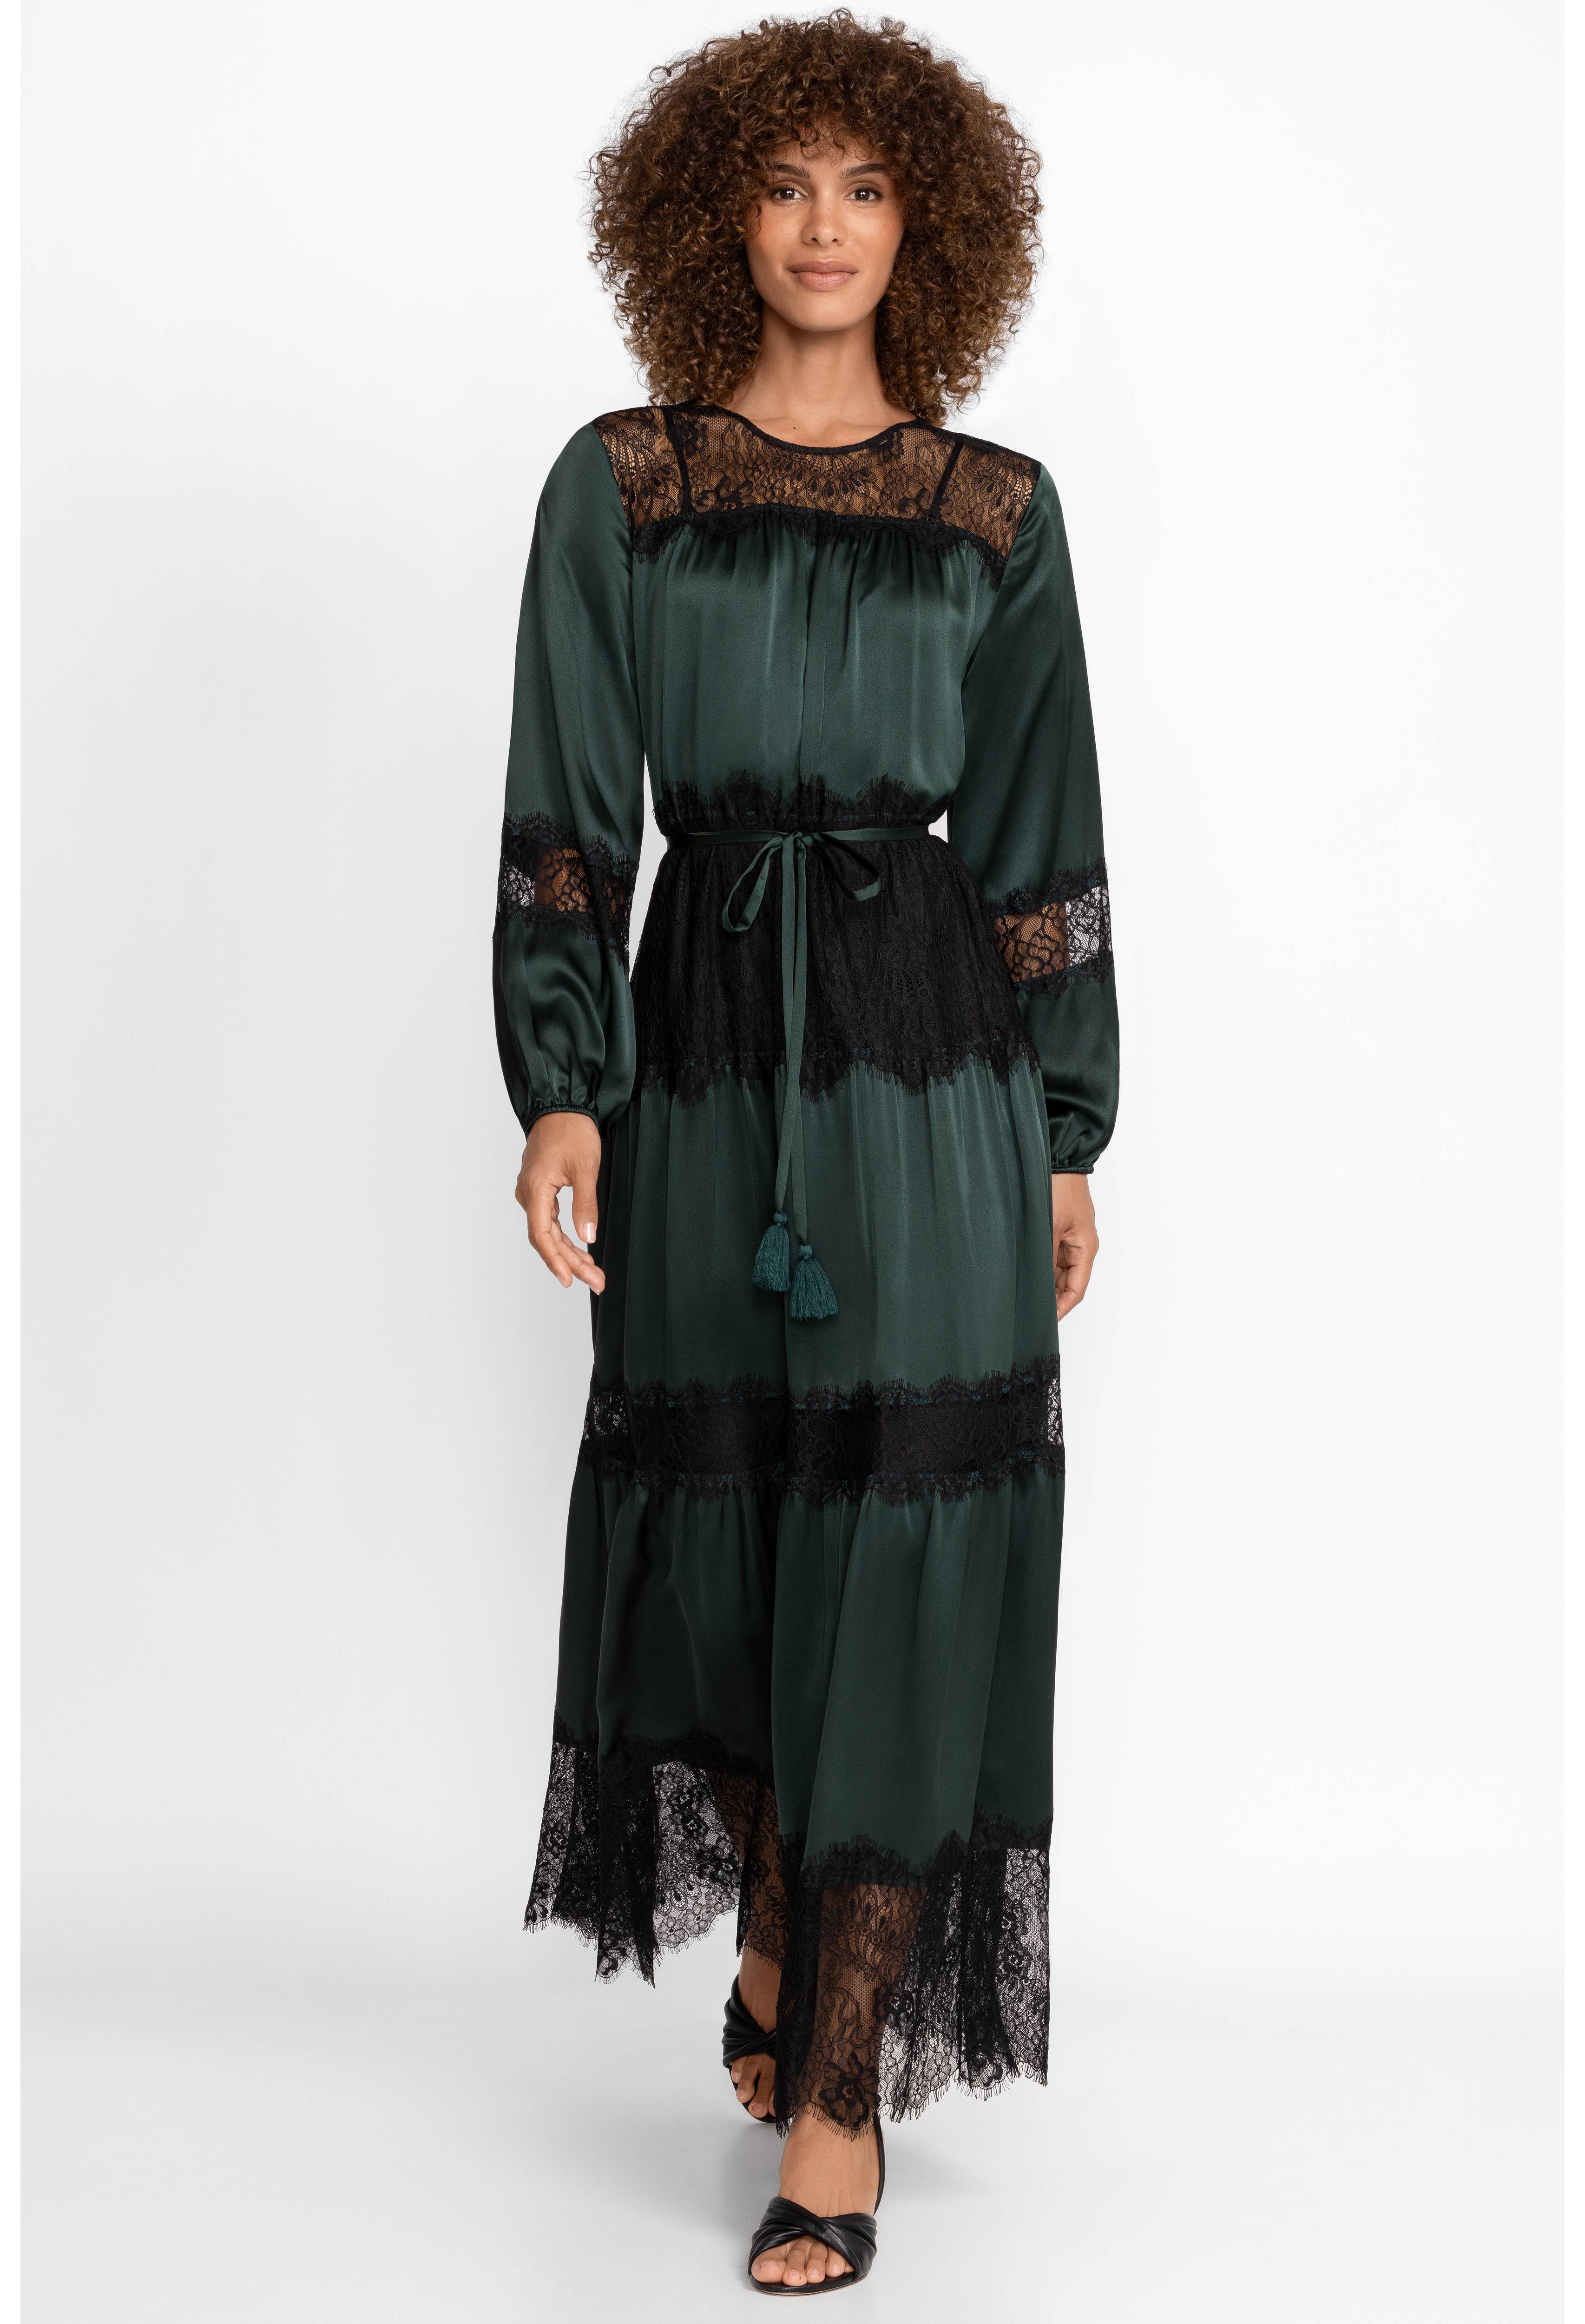 Ellie Lace Tiered Lace Maxi Dress, , large image number 3